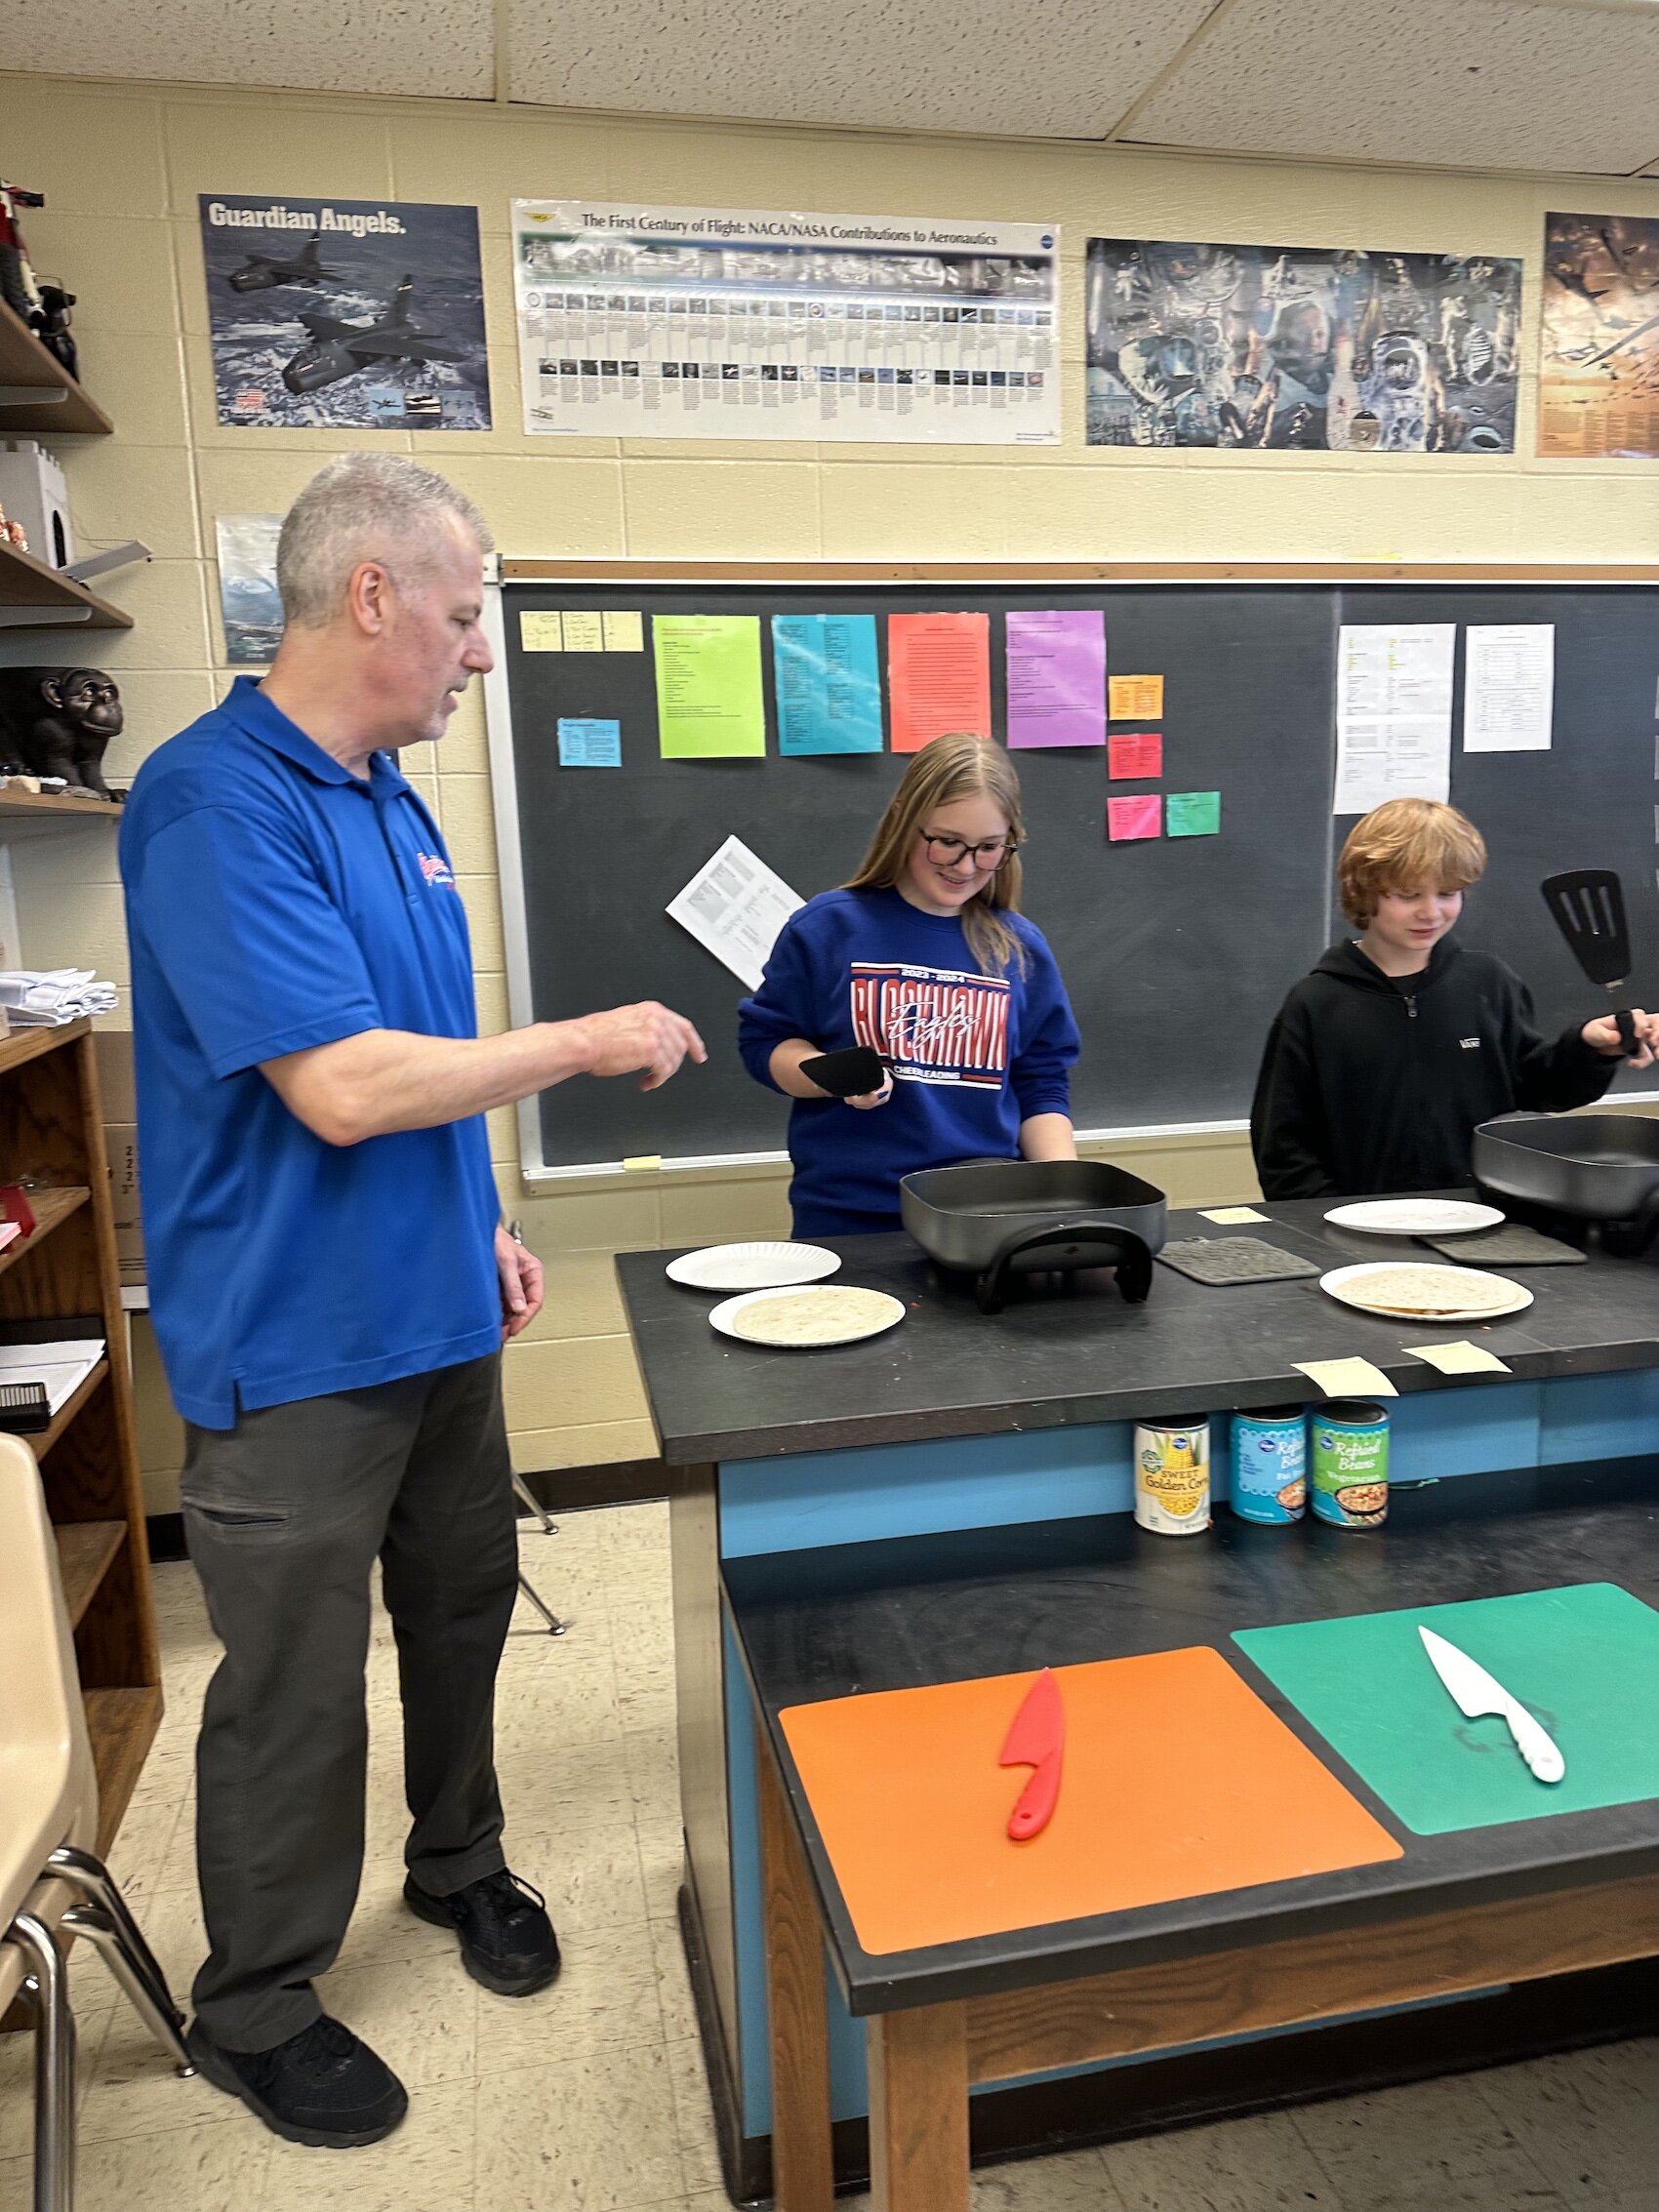 Students in Mr. Larsen's class cook quesadillas as part of the Cooking in the Classroom program.